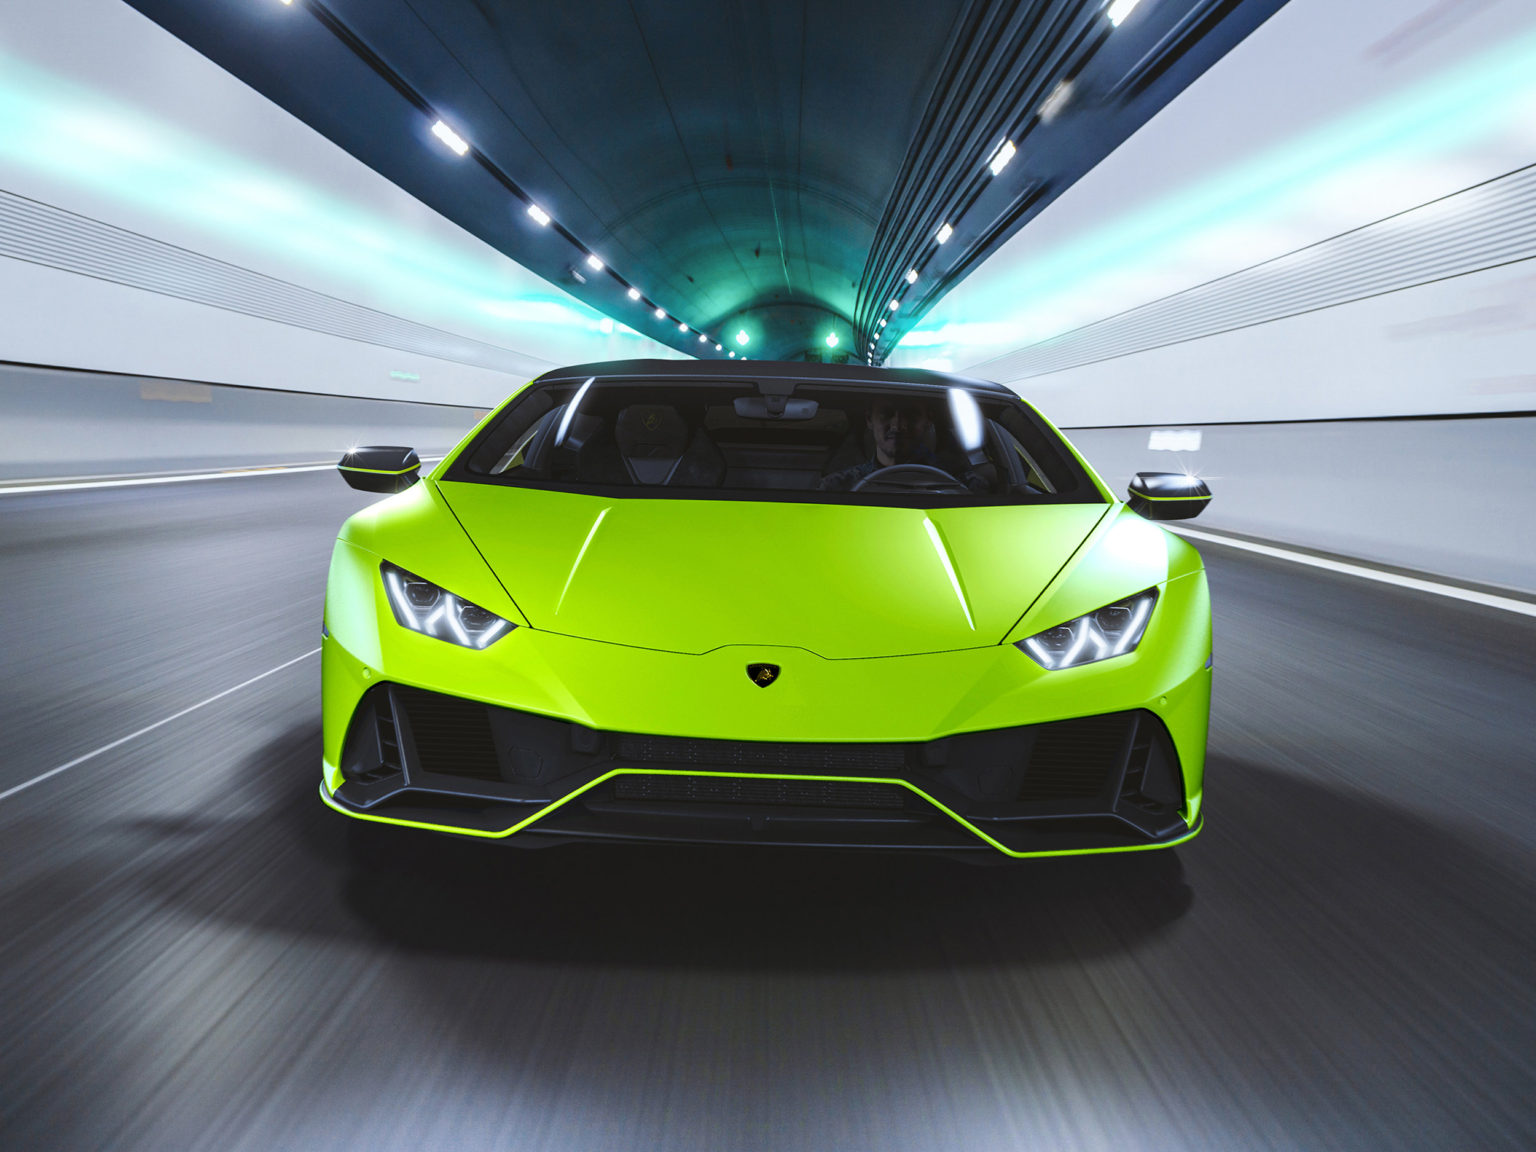 The Lamborghini Huracán EVO Fluo Capsule collection is available for the 2021 model year.